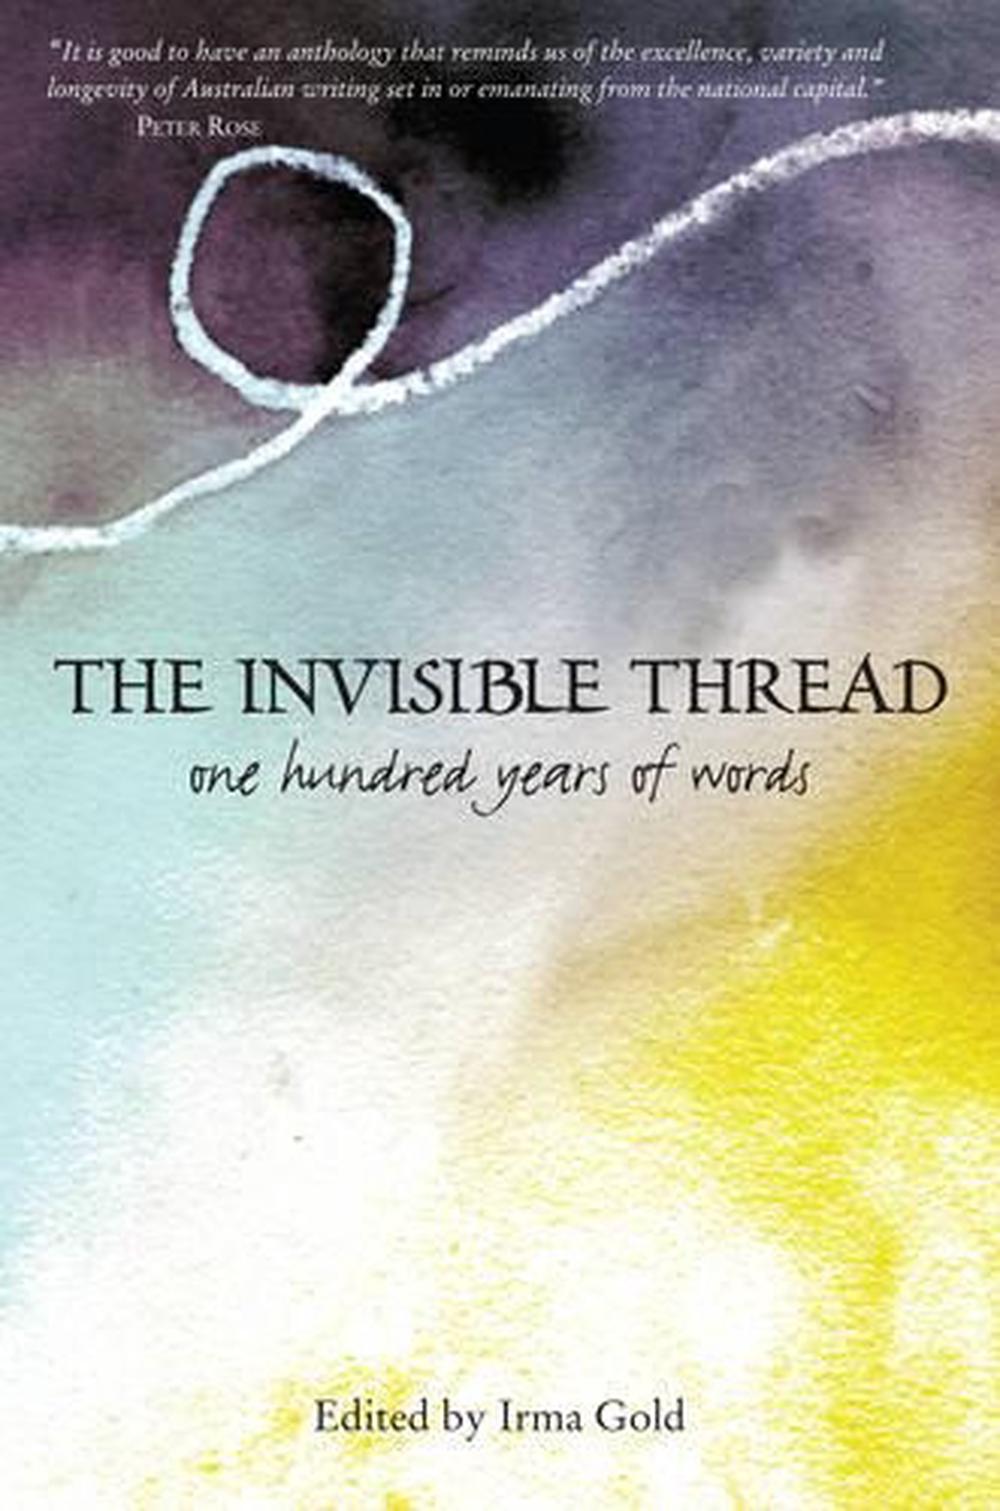 Invisible Thread by Irma Gold, Paperback, 9781920831967